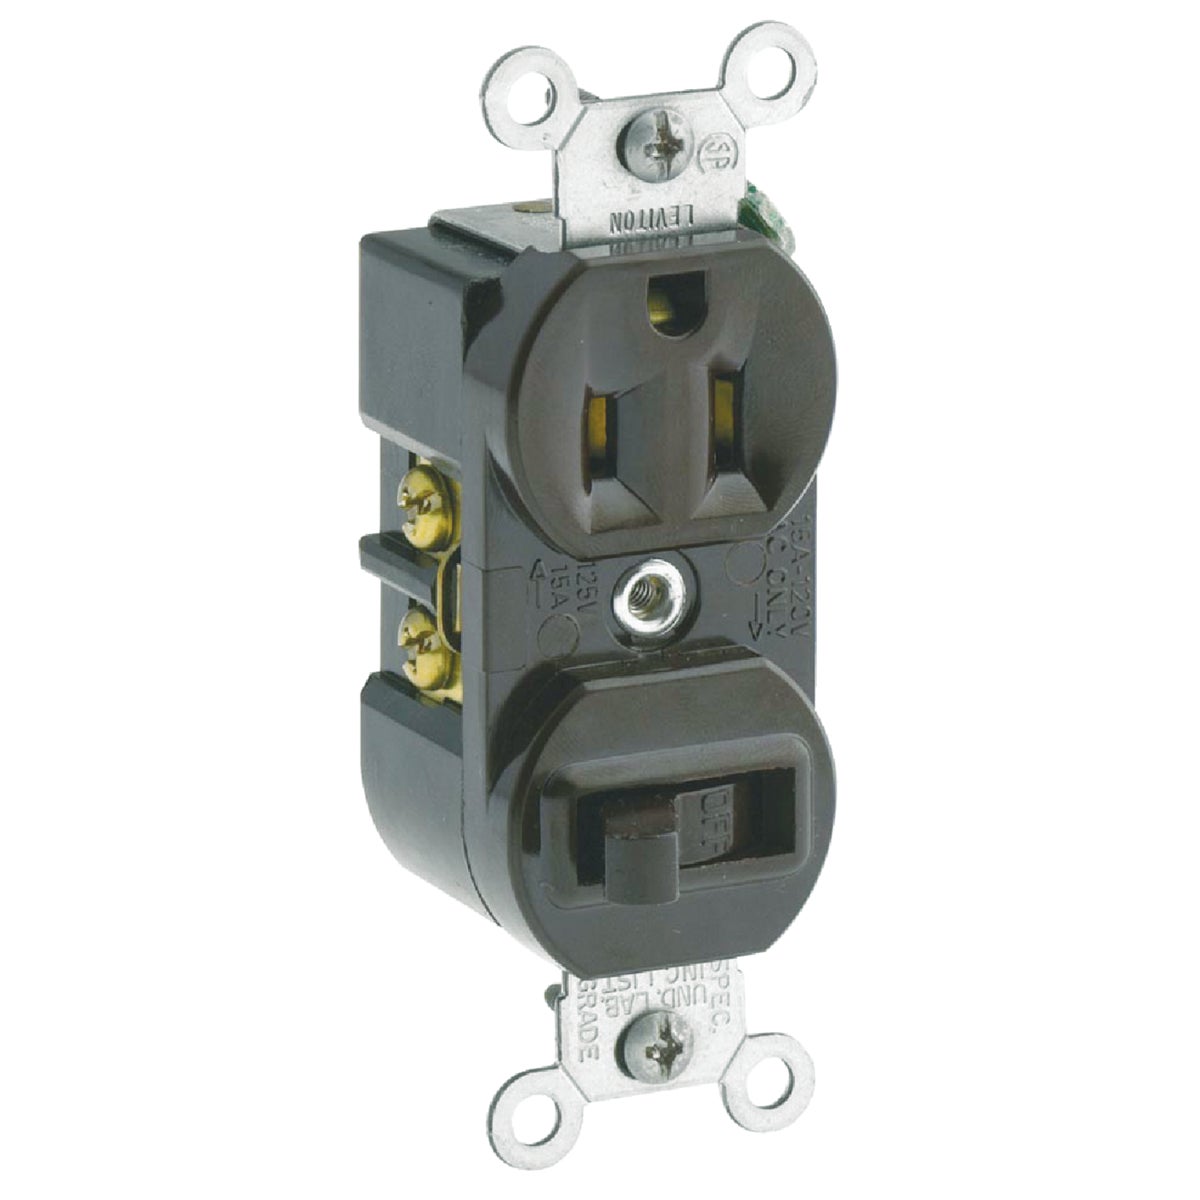 Item 525140, Heavy-duty specification grade single pole switch and grounded outlet 